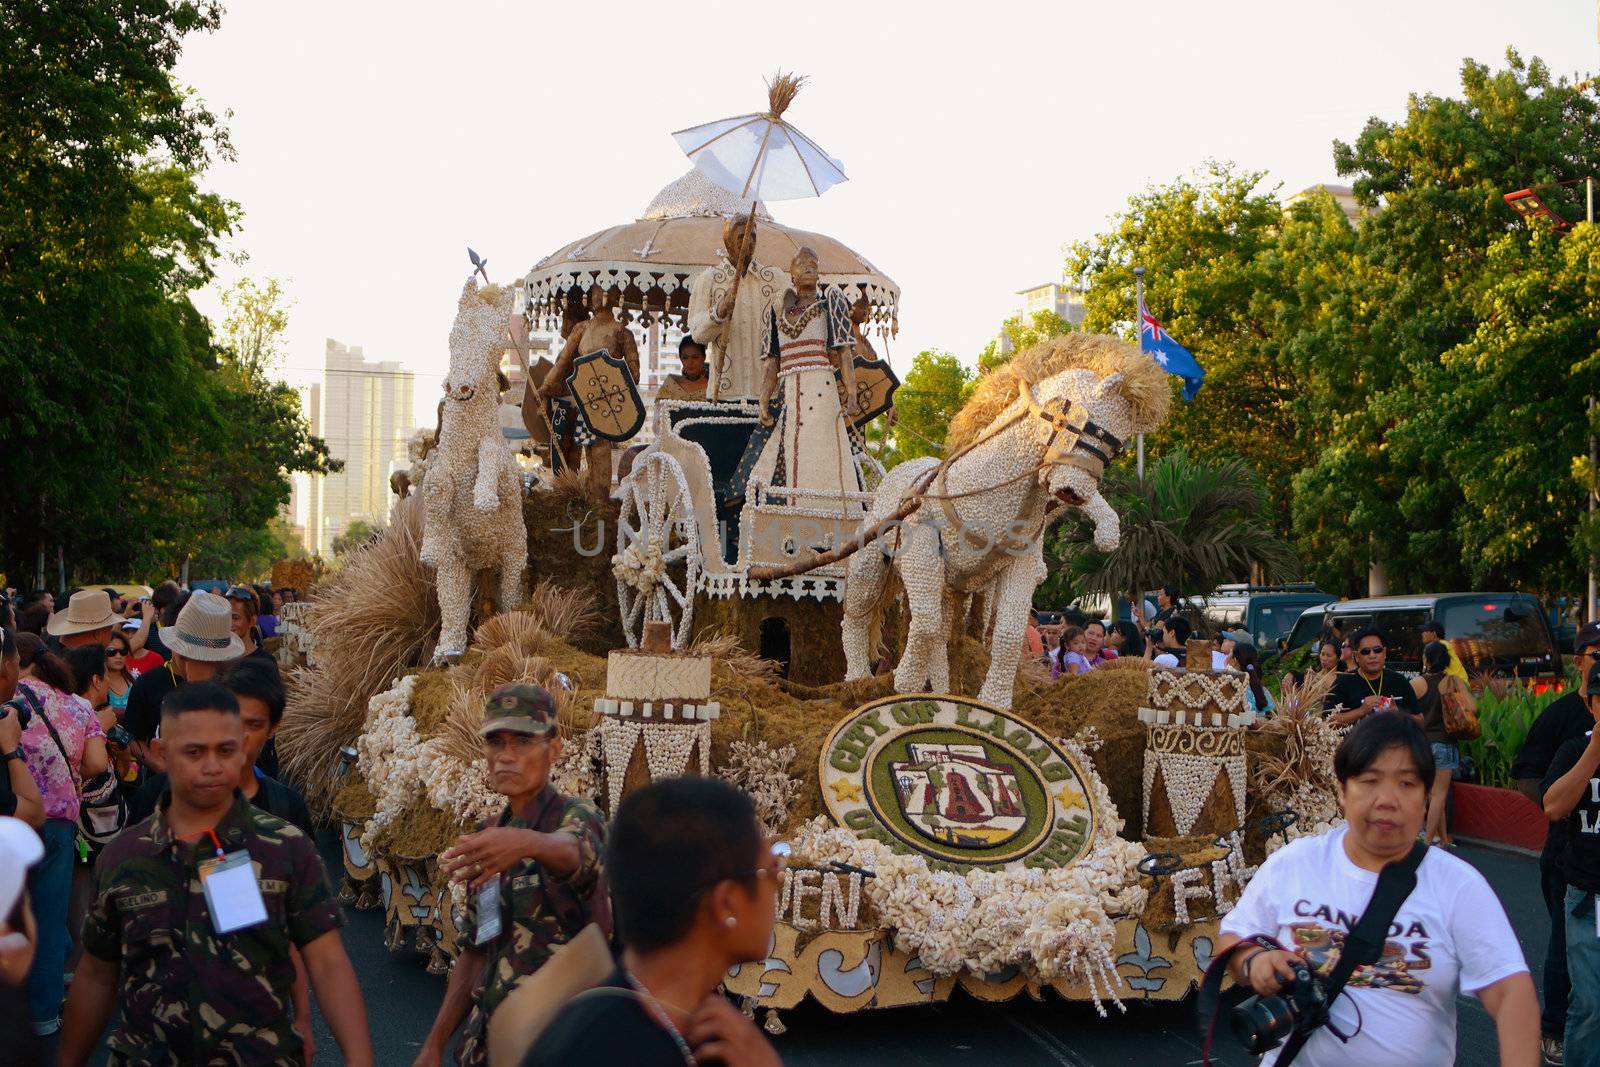 MANILA, PHILIPPINES - APR. 14: City of Laoag float made of garlic during Aliwan Fiesta, which is the biggest annual national festival competition on April 14, 2012 in Manila Philippines.